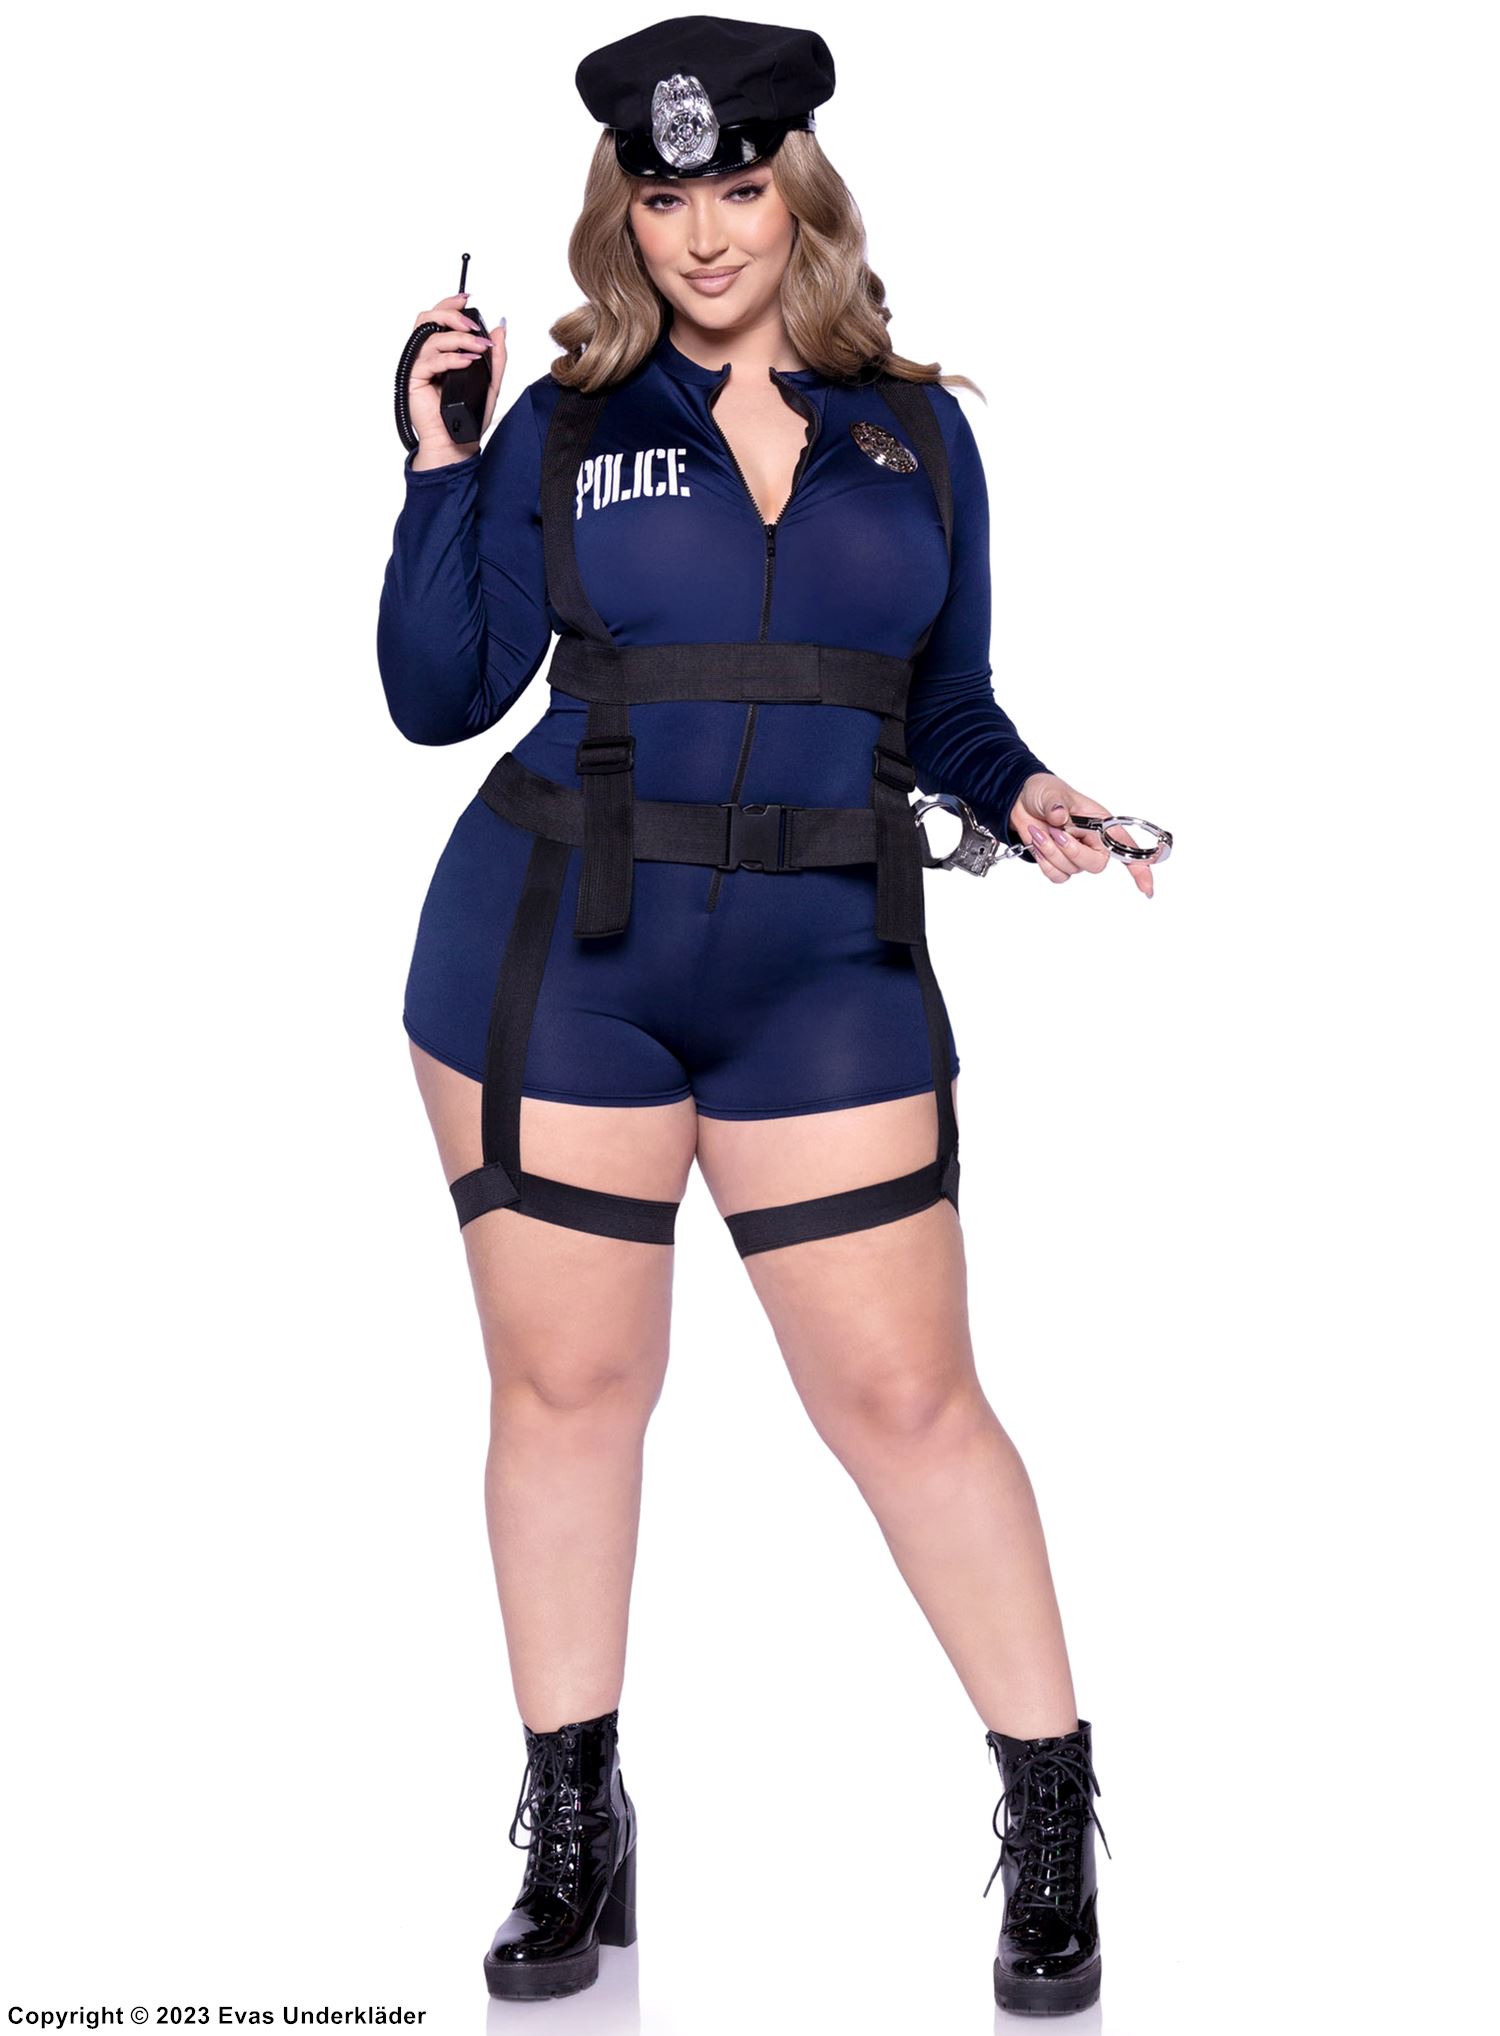 Female police officer, costume romper, long sleeves, front zipper, plus size